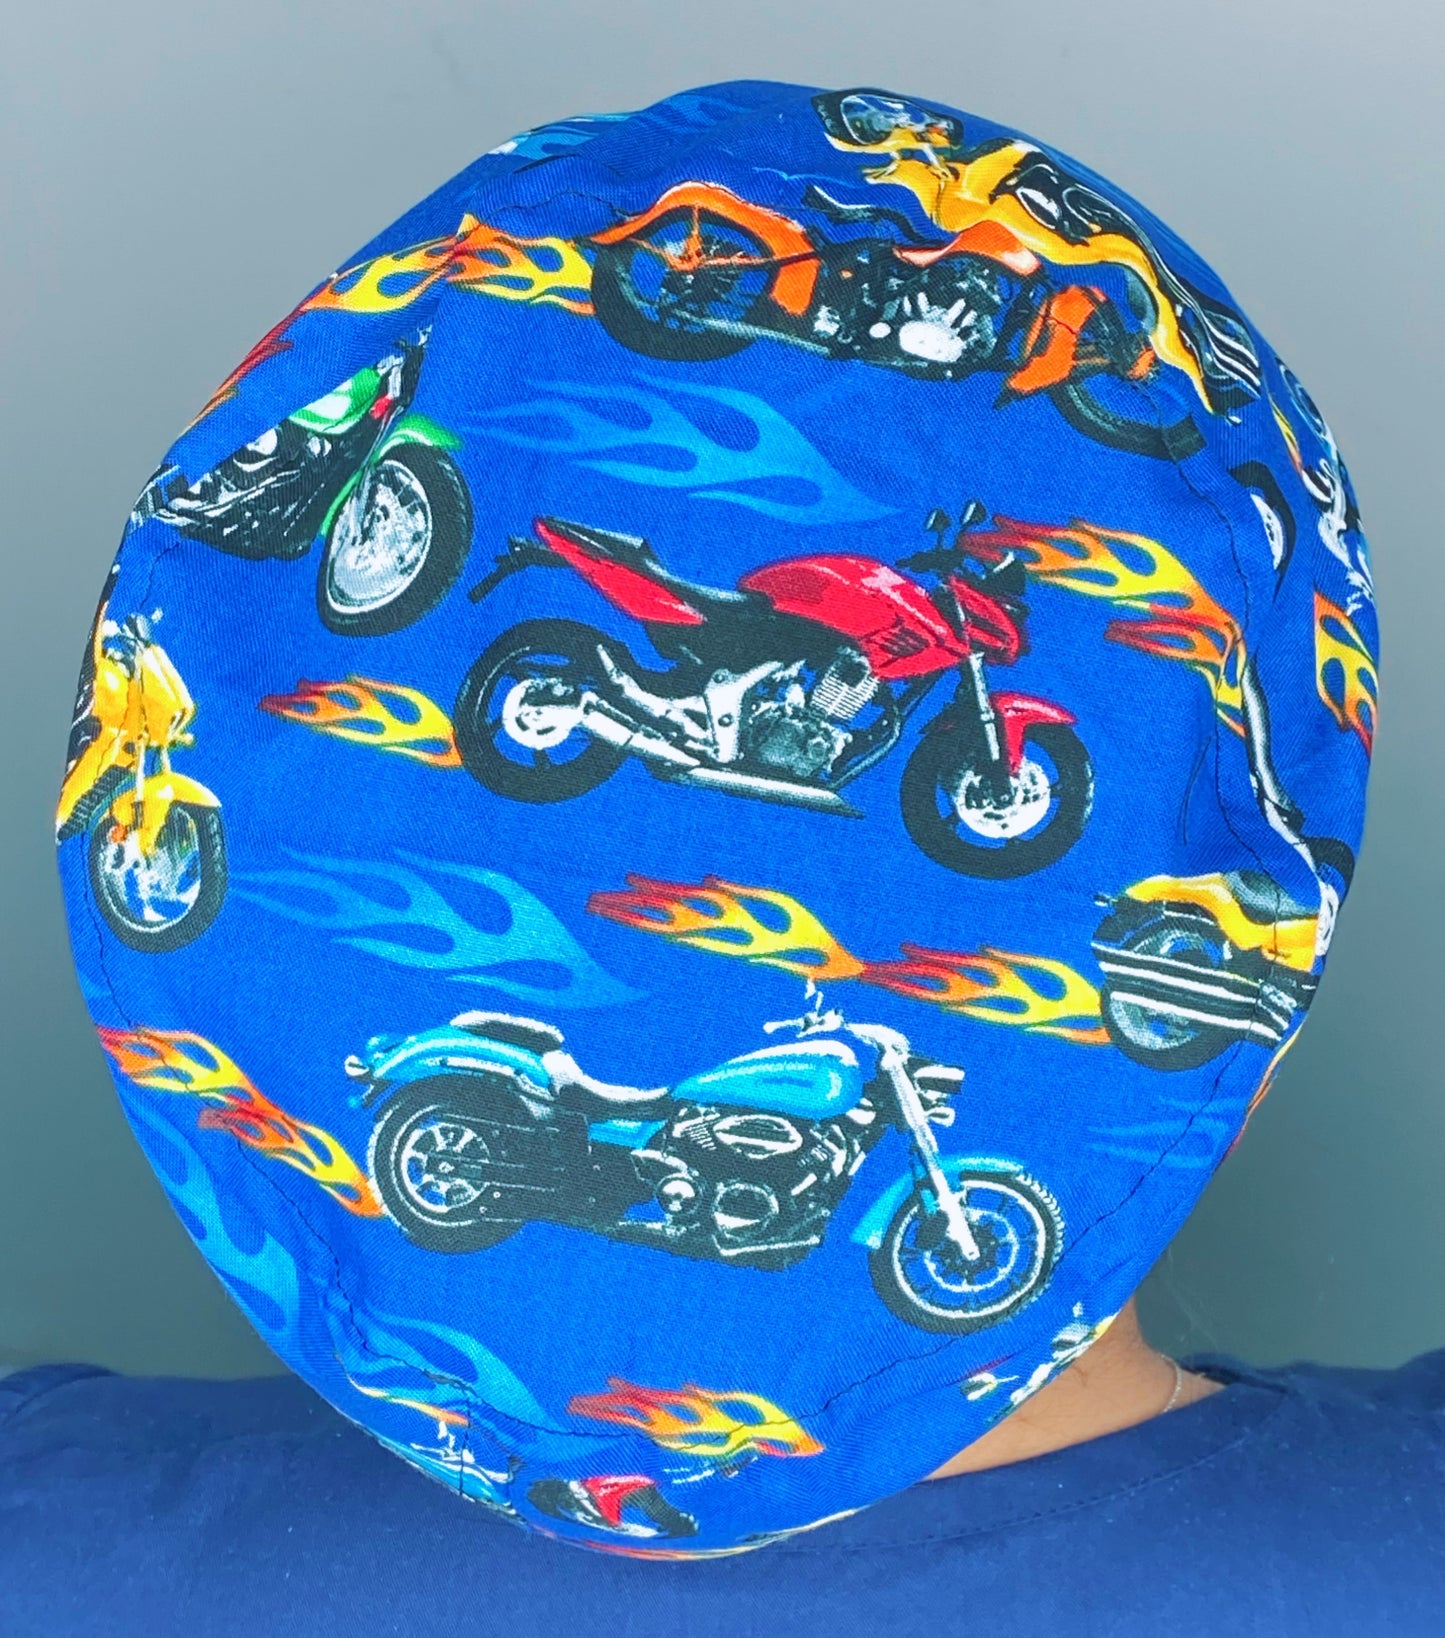 Motorcycles with Flames on Blue Euro